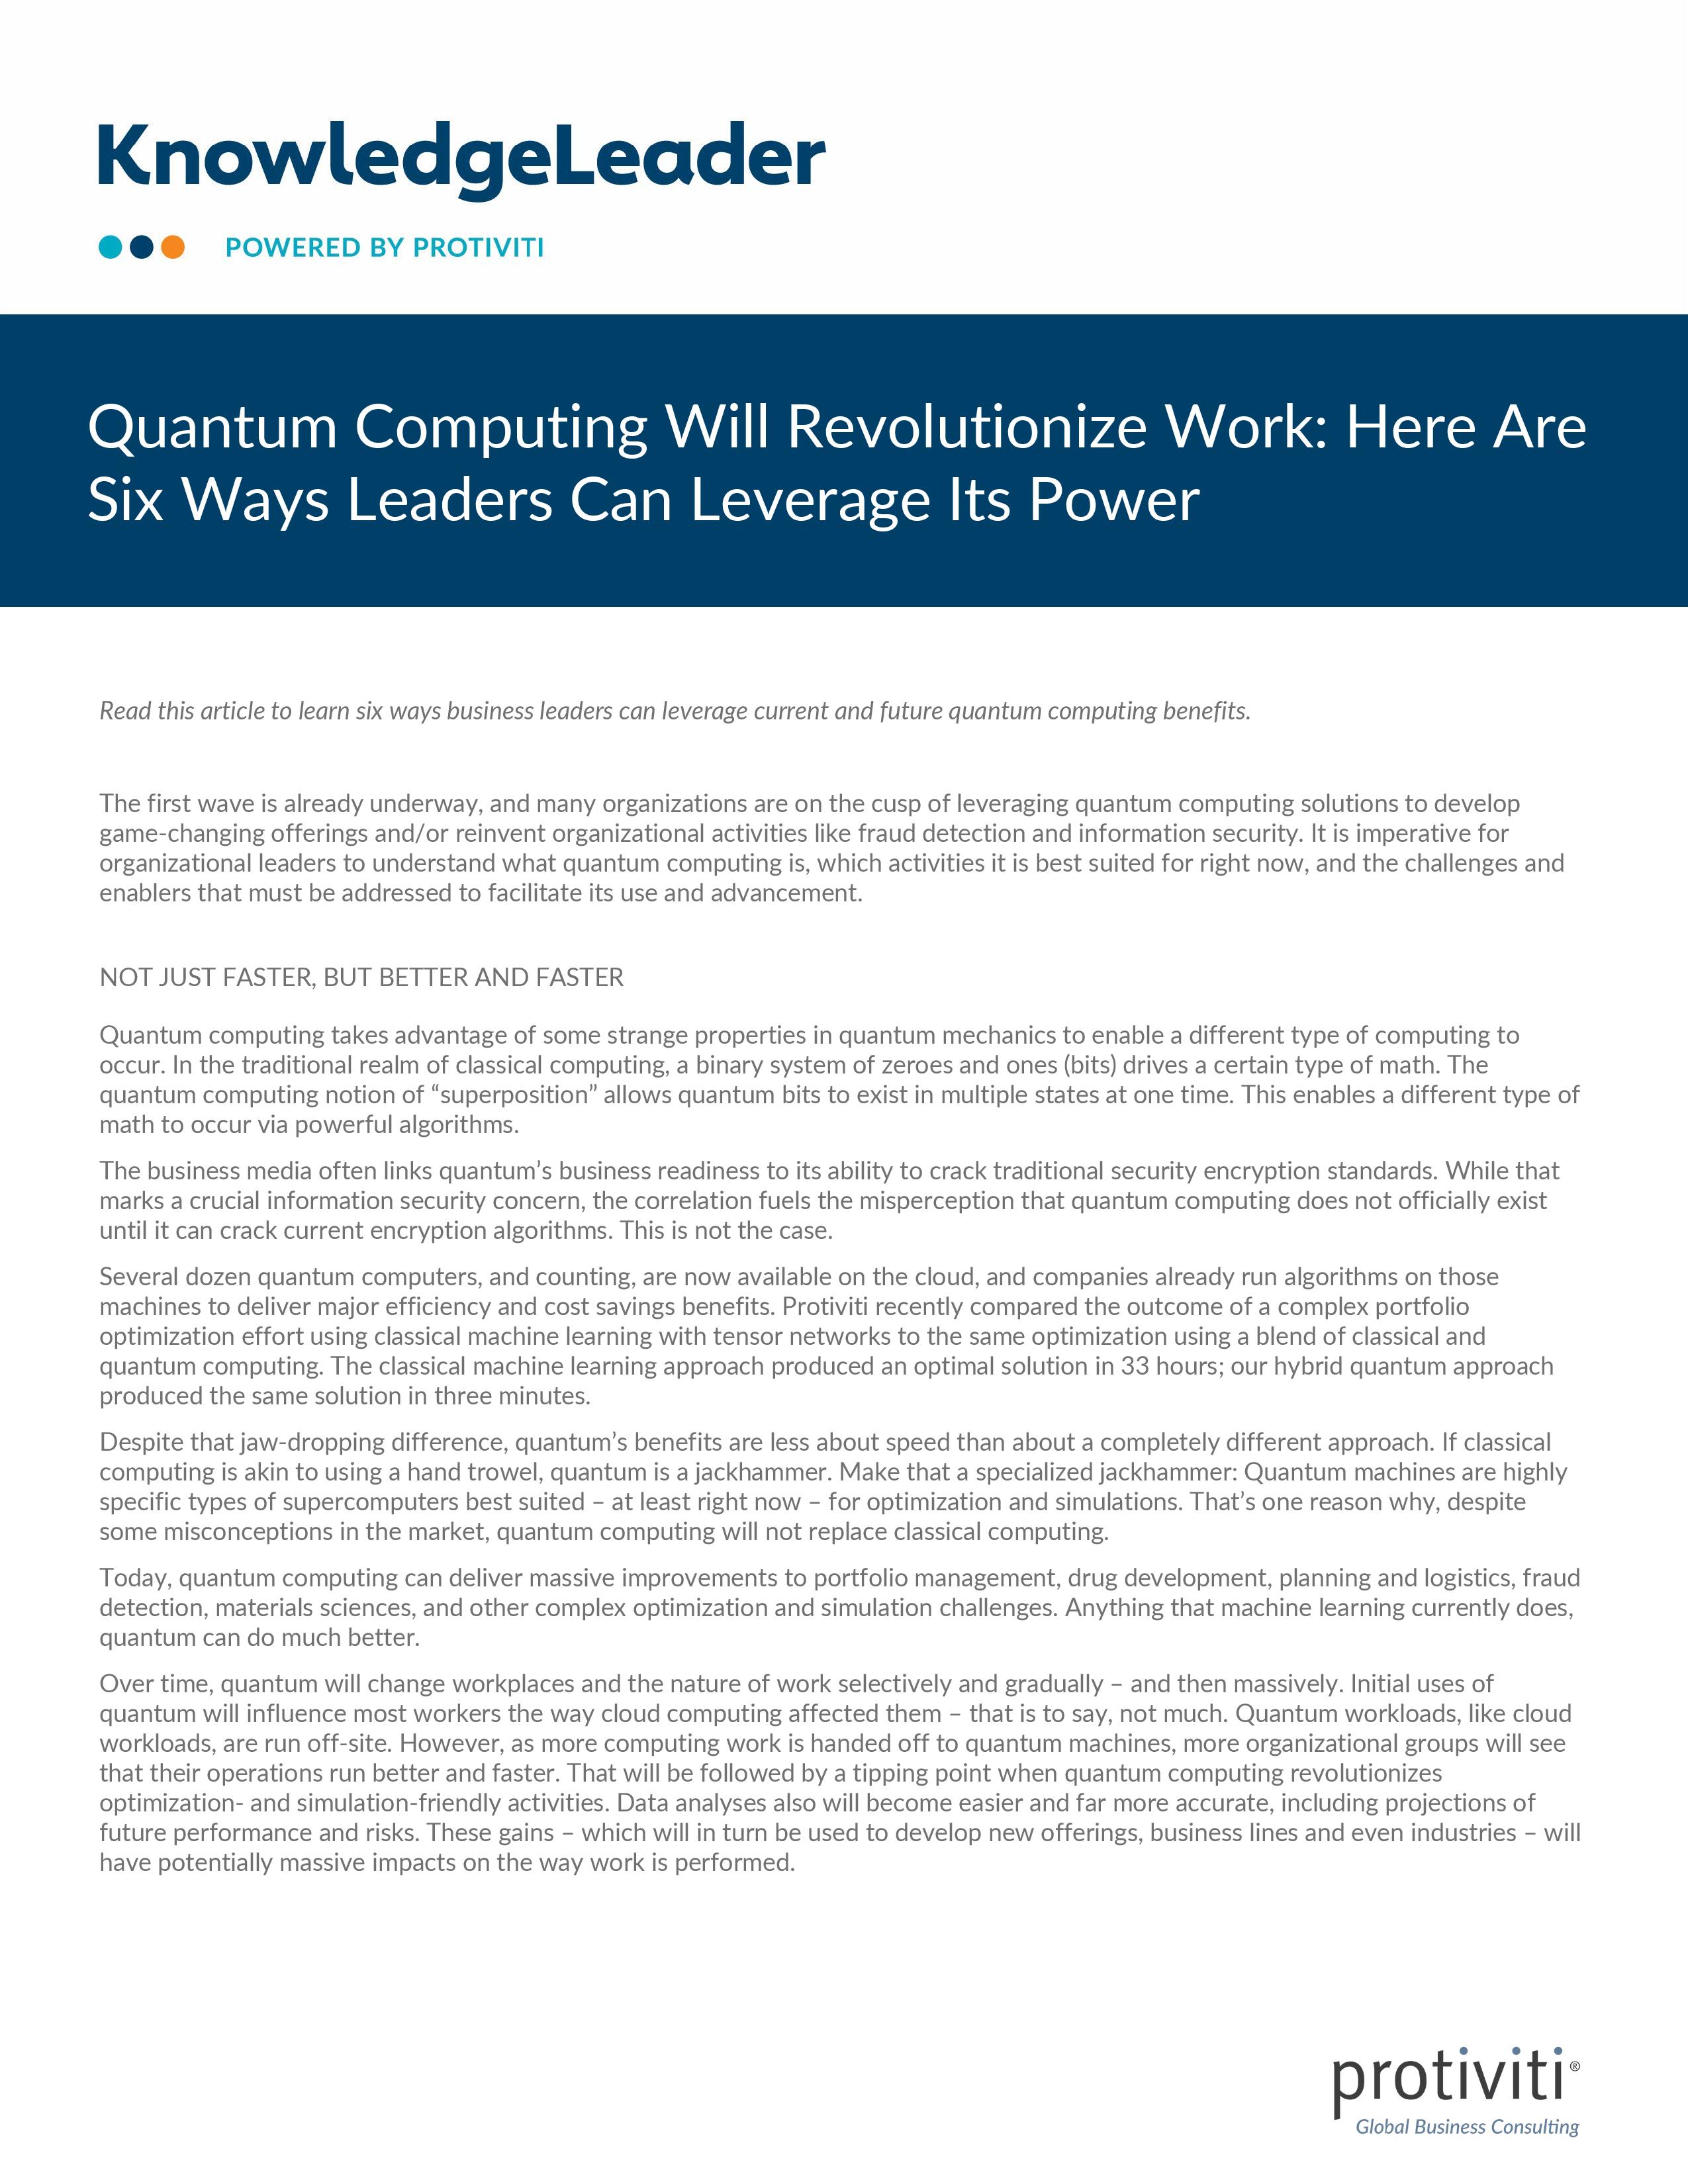 screenshot of the first page of Quantum Computing Will Revolutionize Work Here Are Six Ways Leaders Can Leverage Its Power